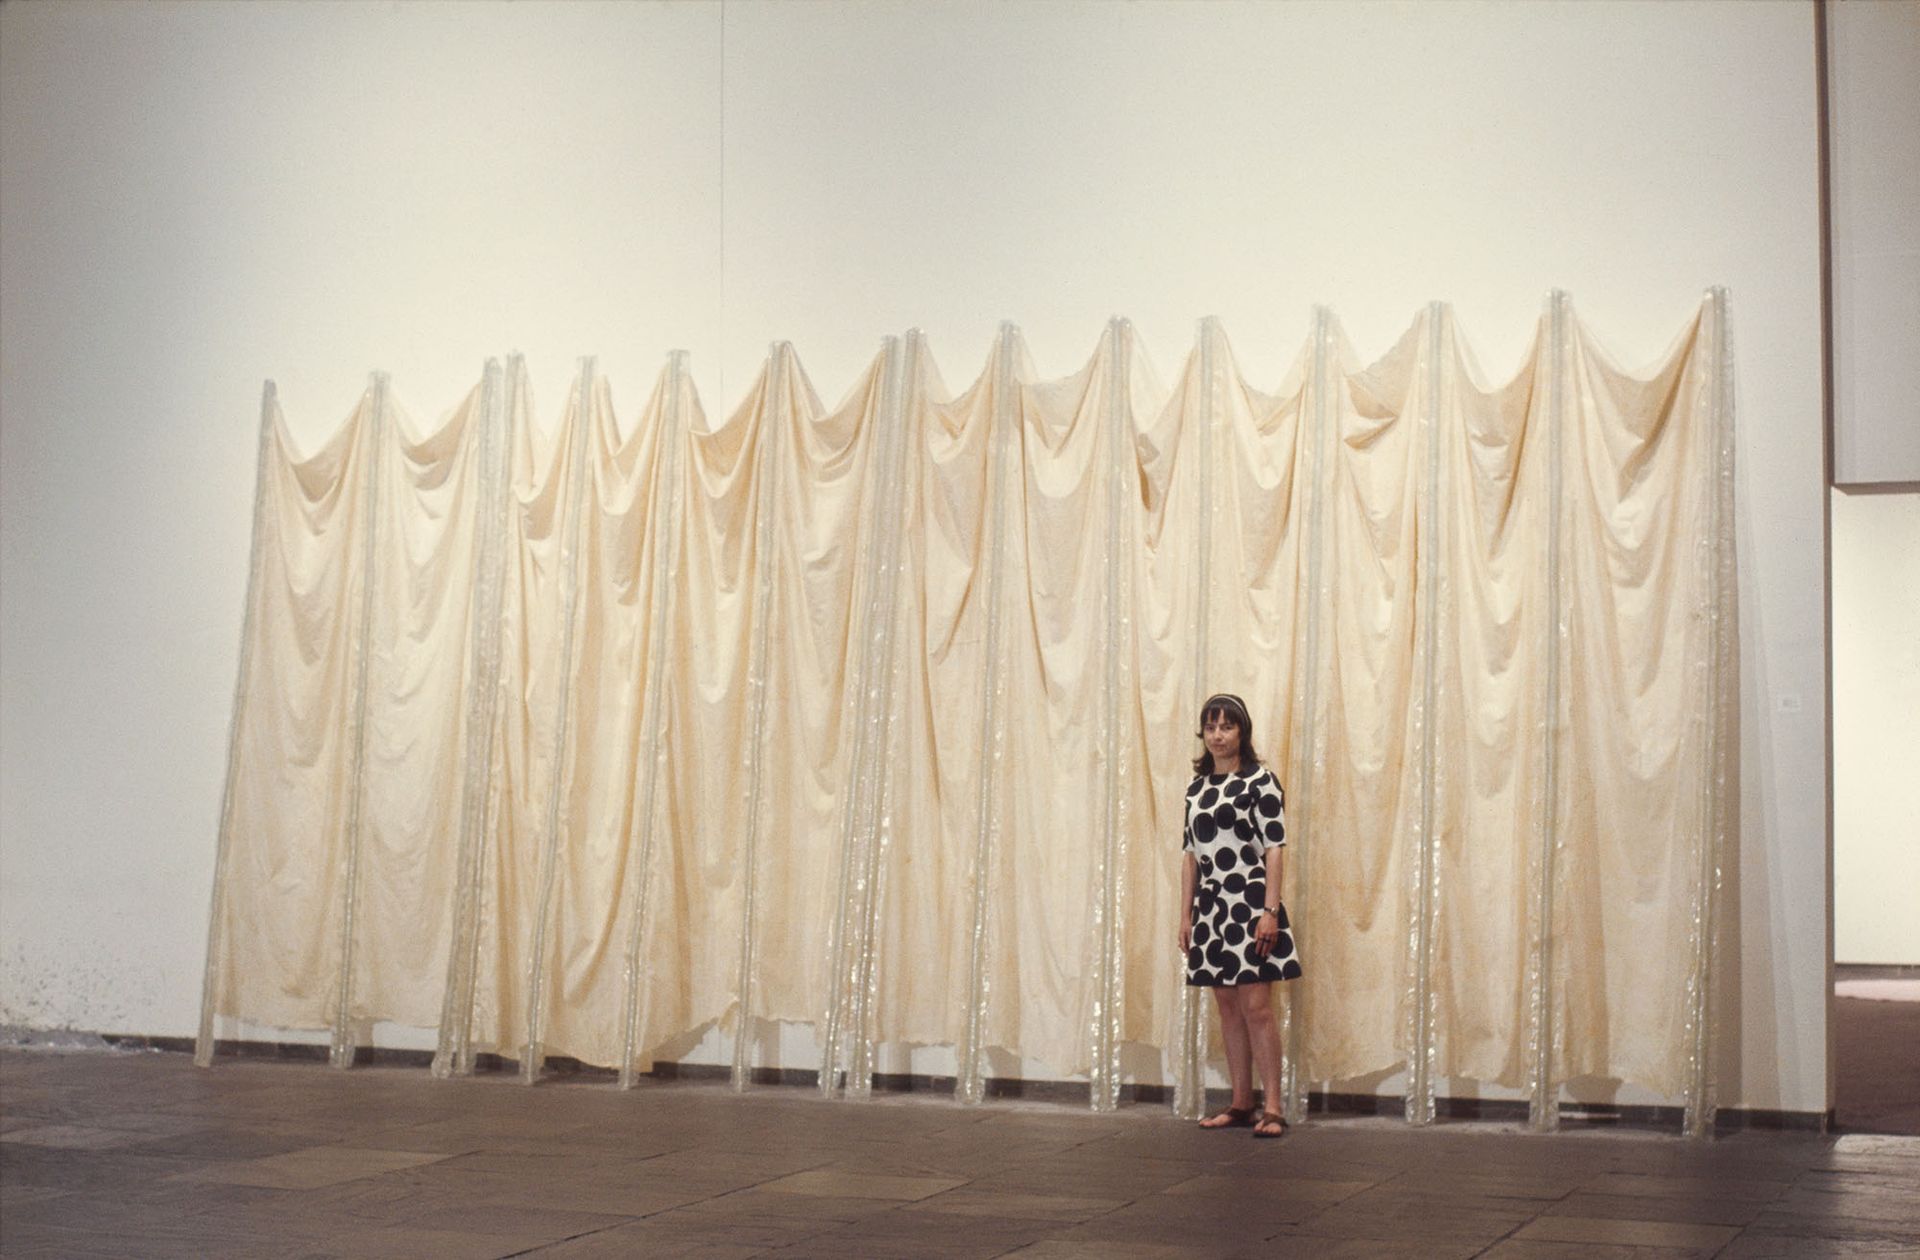 Eva Hesse in front of Expanded Expansion, 1969. Installation view, Anti-Illusion: Procedures/Materials, Whitney Museum of American Art, New York, 19 May-6 July 1969. Photo: Courtesy Frances Mulhall Achilles Library, Whitney Museum of American Art, New York